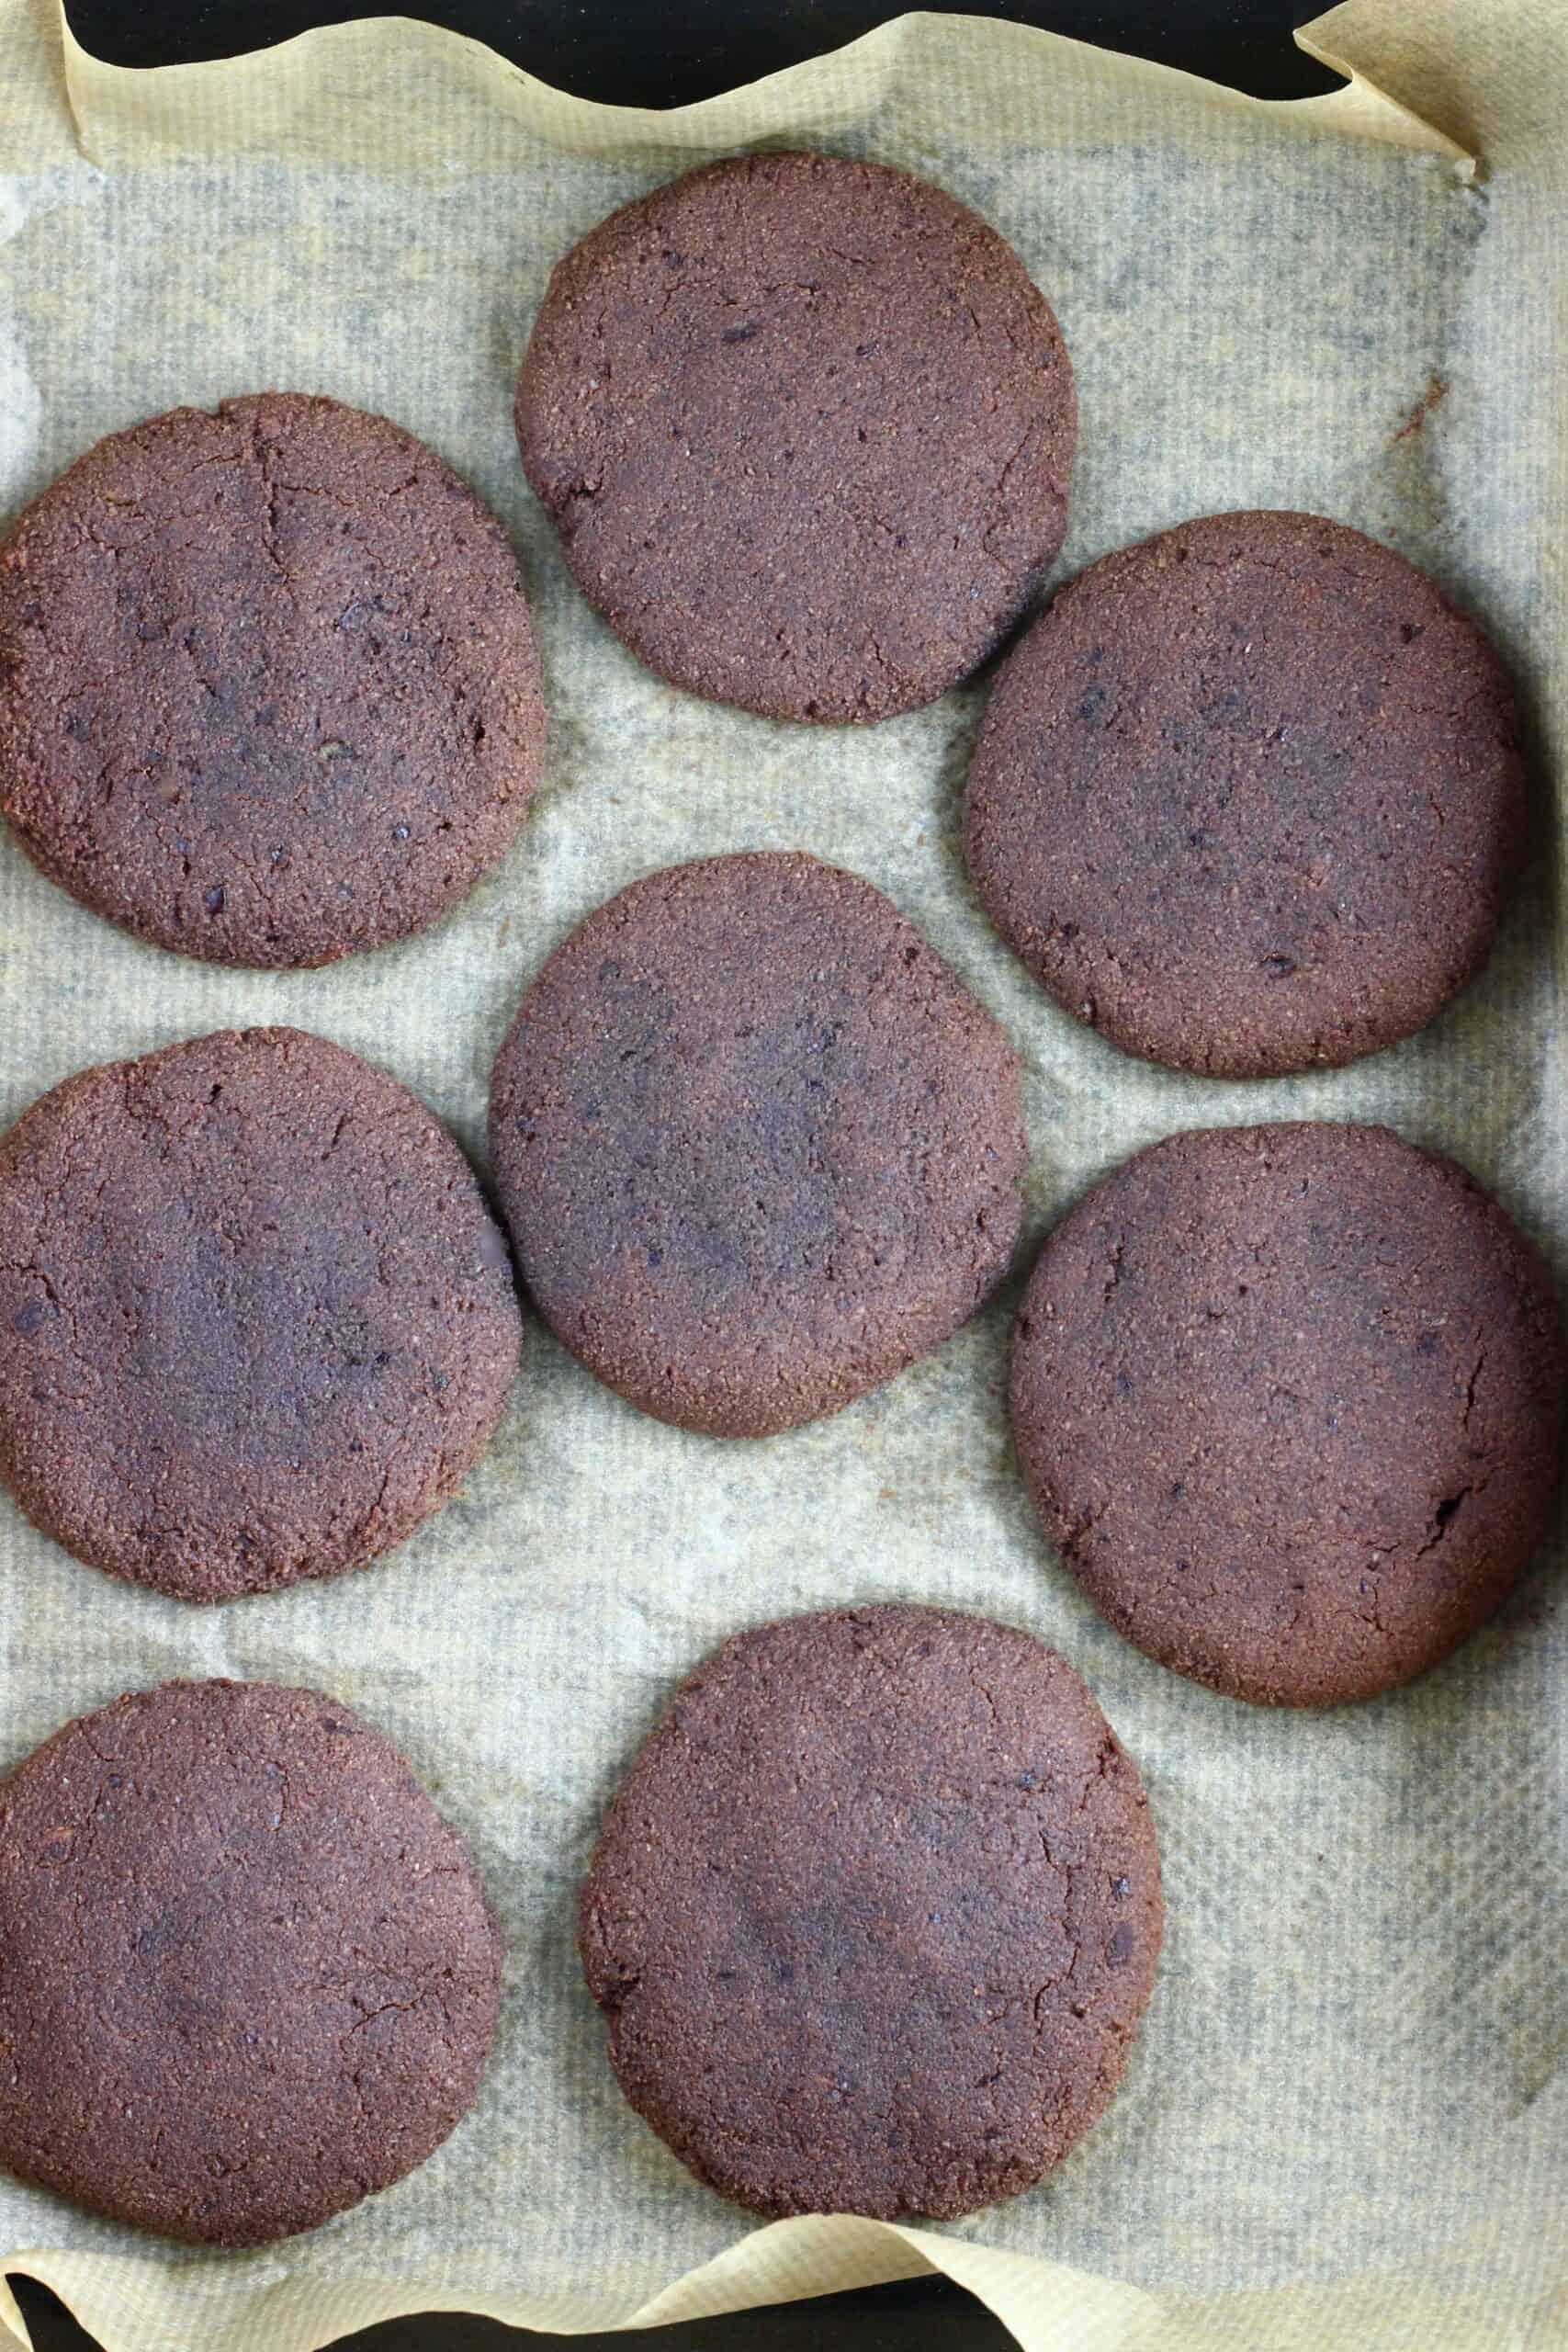 Eight gluten-free vegan chocolate brownie cookies on a baking tray lined with baking paper